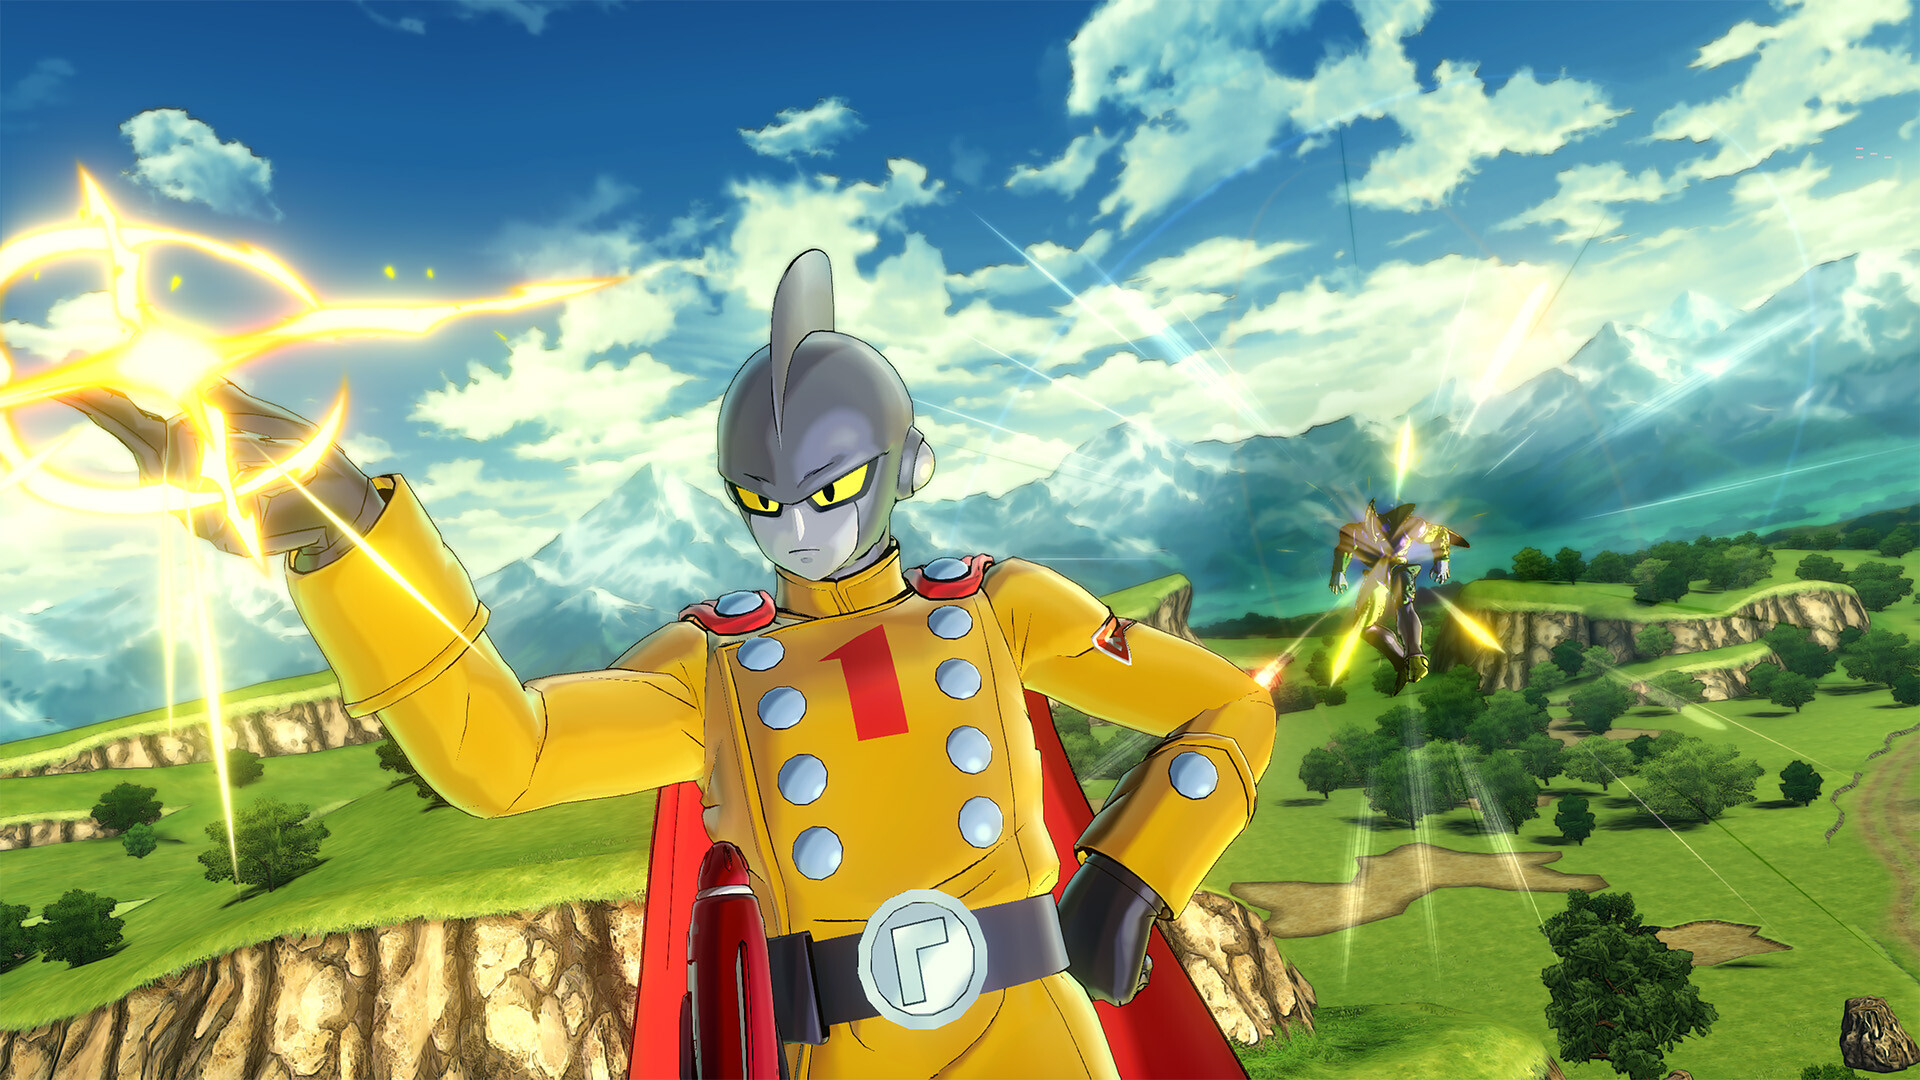 Comprar Dragon Ball Xenoverse 2 - Hero of Justice Pack Set Steam